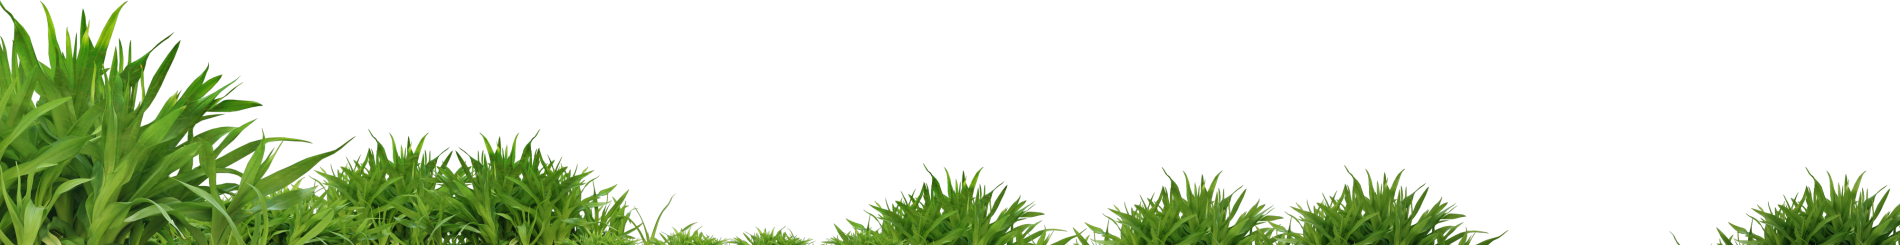 Grass Png Image, Green Grass Png Picture - Tree And Grass For Picsart (1900x245)